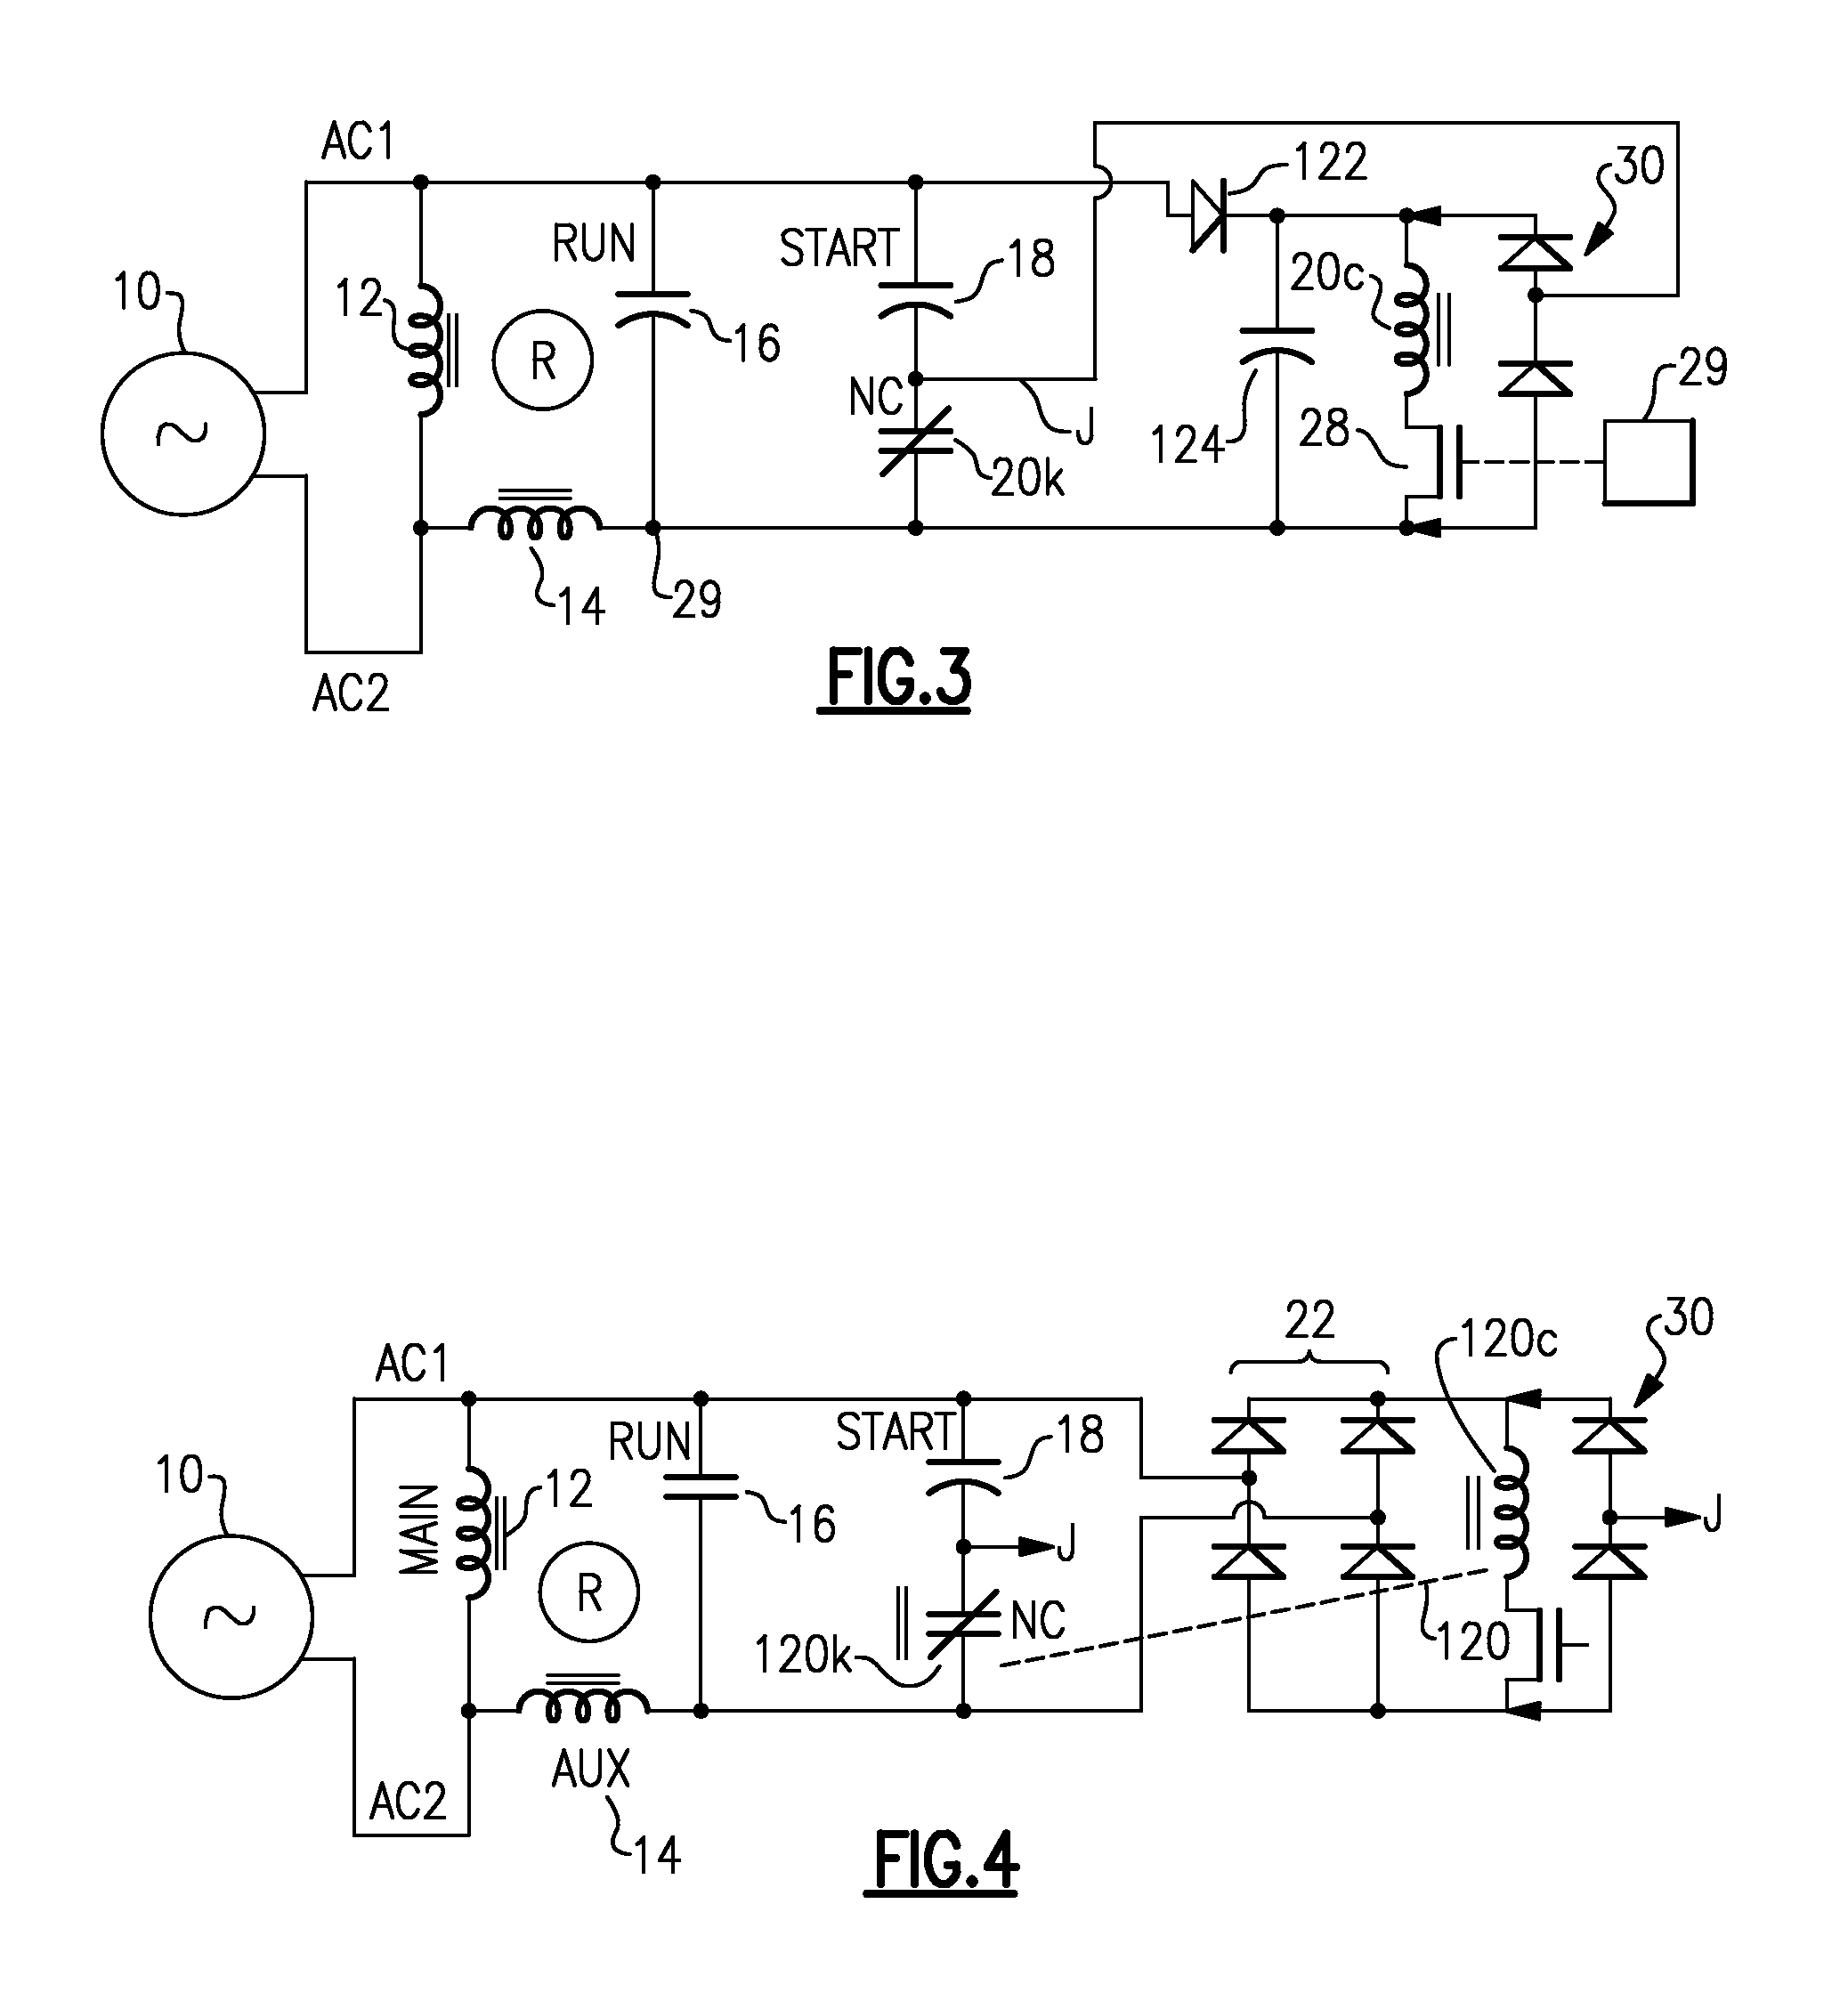 Motor Start Circuit with Capacitive Discharge Protection